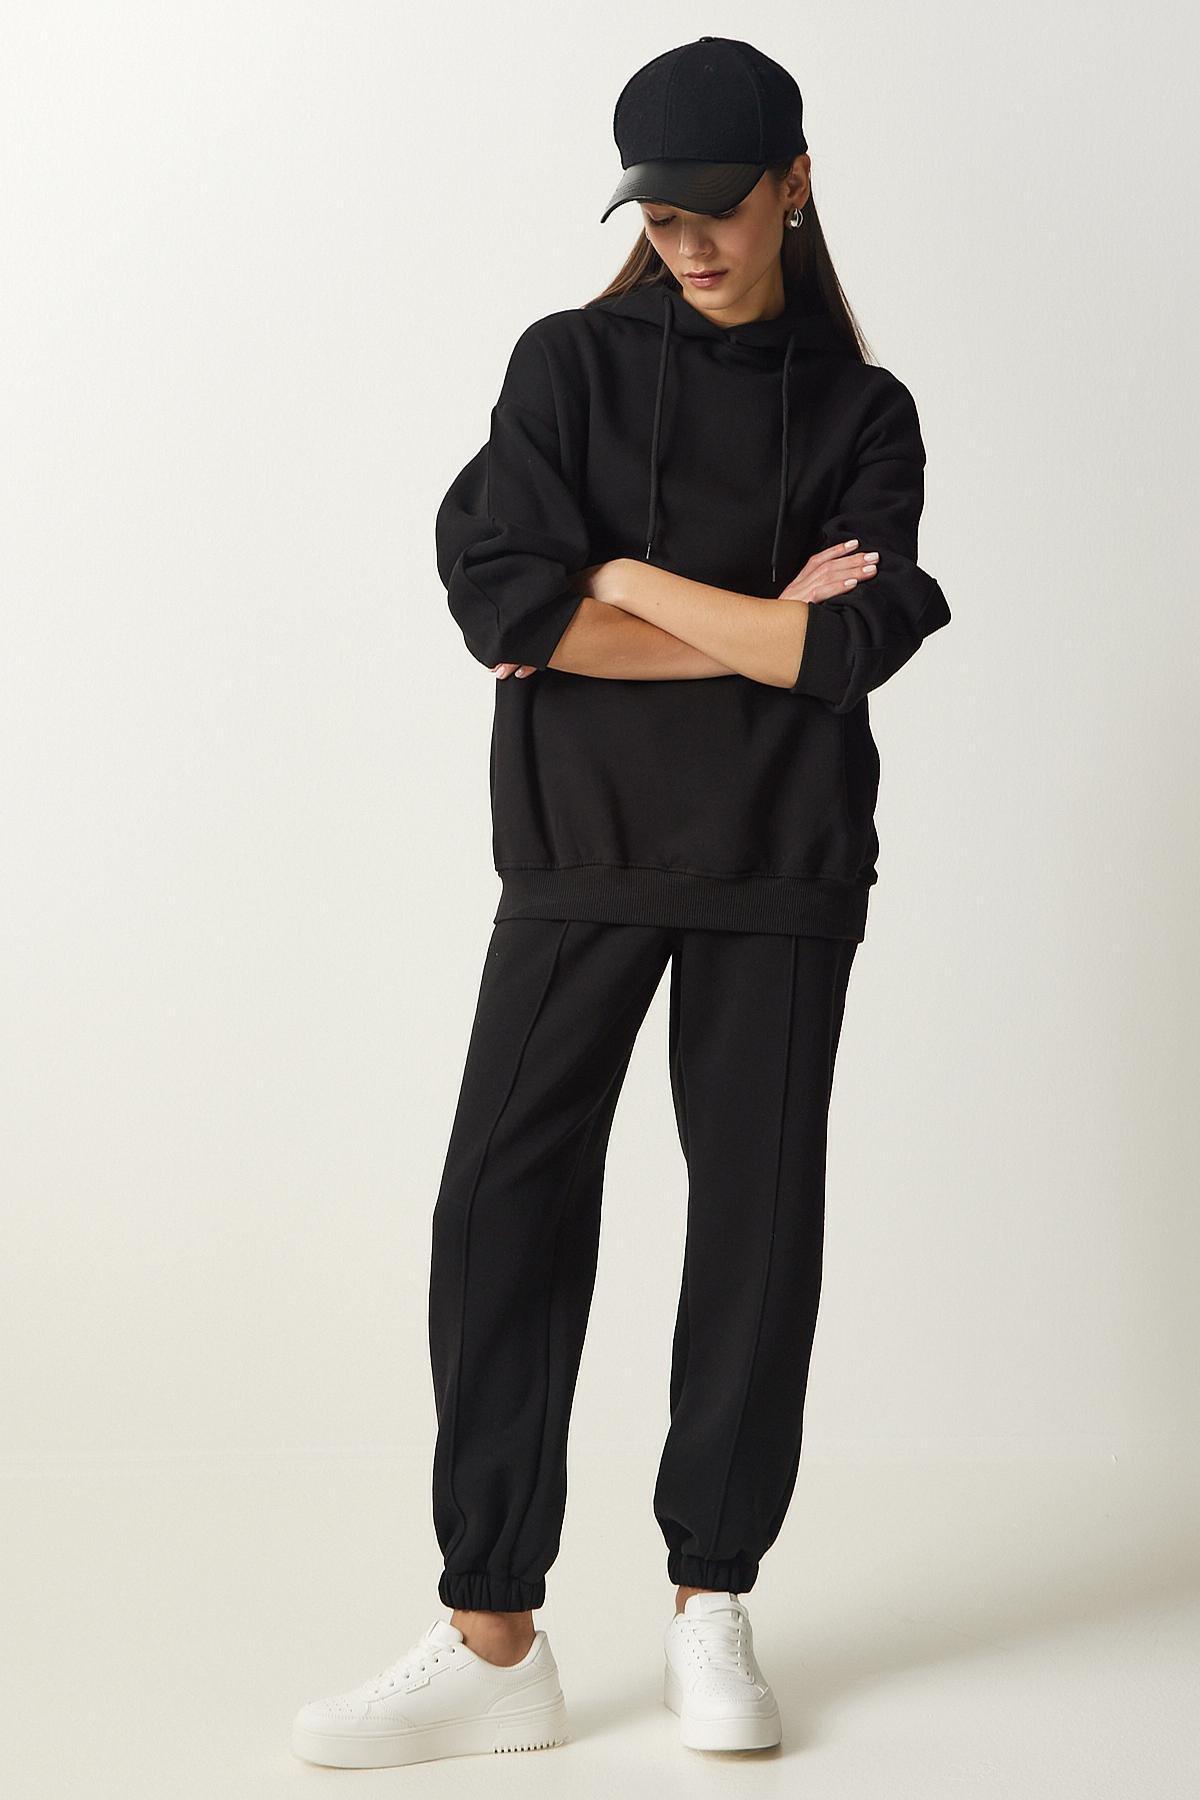 Happiness Istanbul - Womens Black Hooded Raised Knitted Tracksuit Set DD01279, 2 x